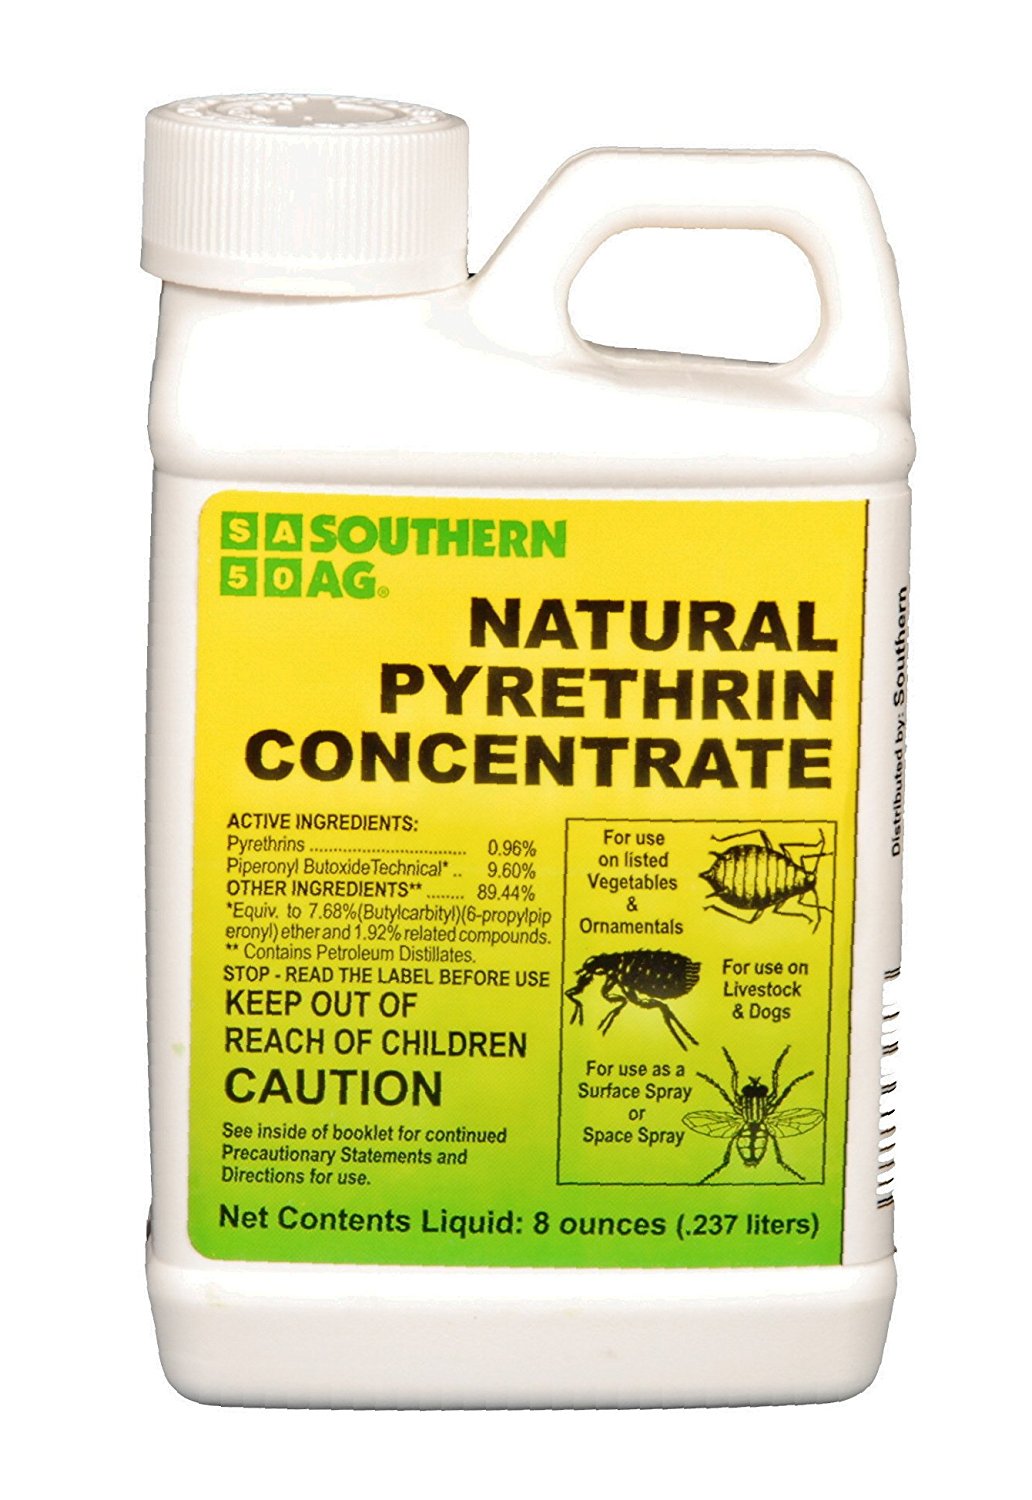 5 Best Insecticides To Eliminate Bugs Ants And Pests In Your Garden